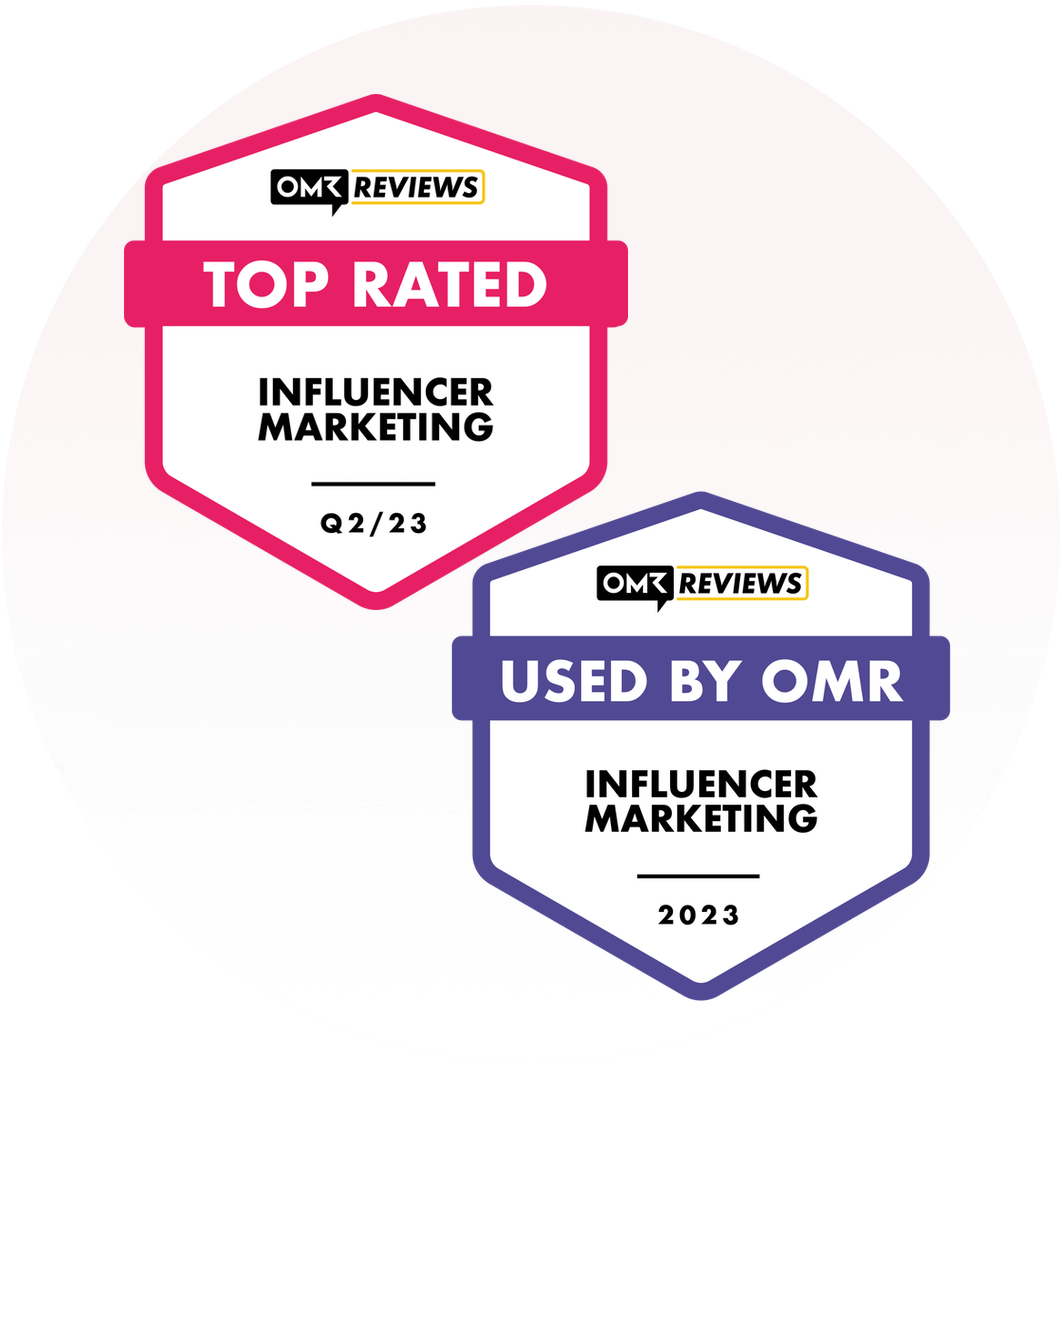 OMR Top Rated Influencer-Marekting Tool Badge Q2 2023 and Used by OMR Badge 2023 for influData